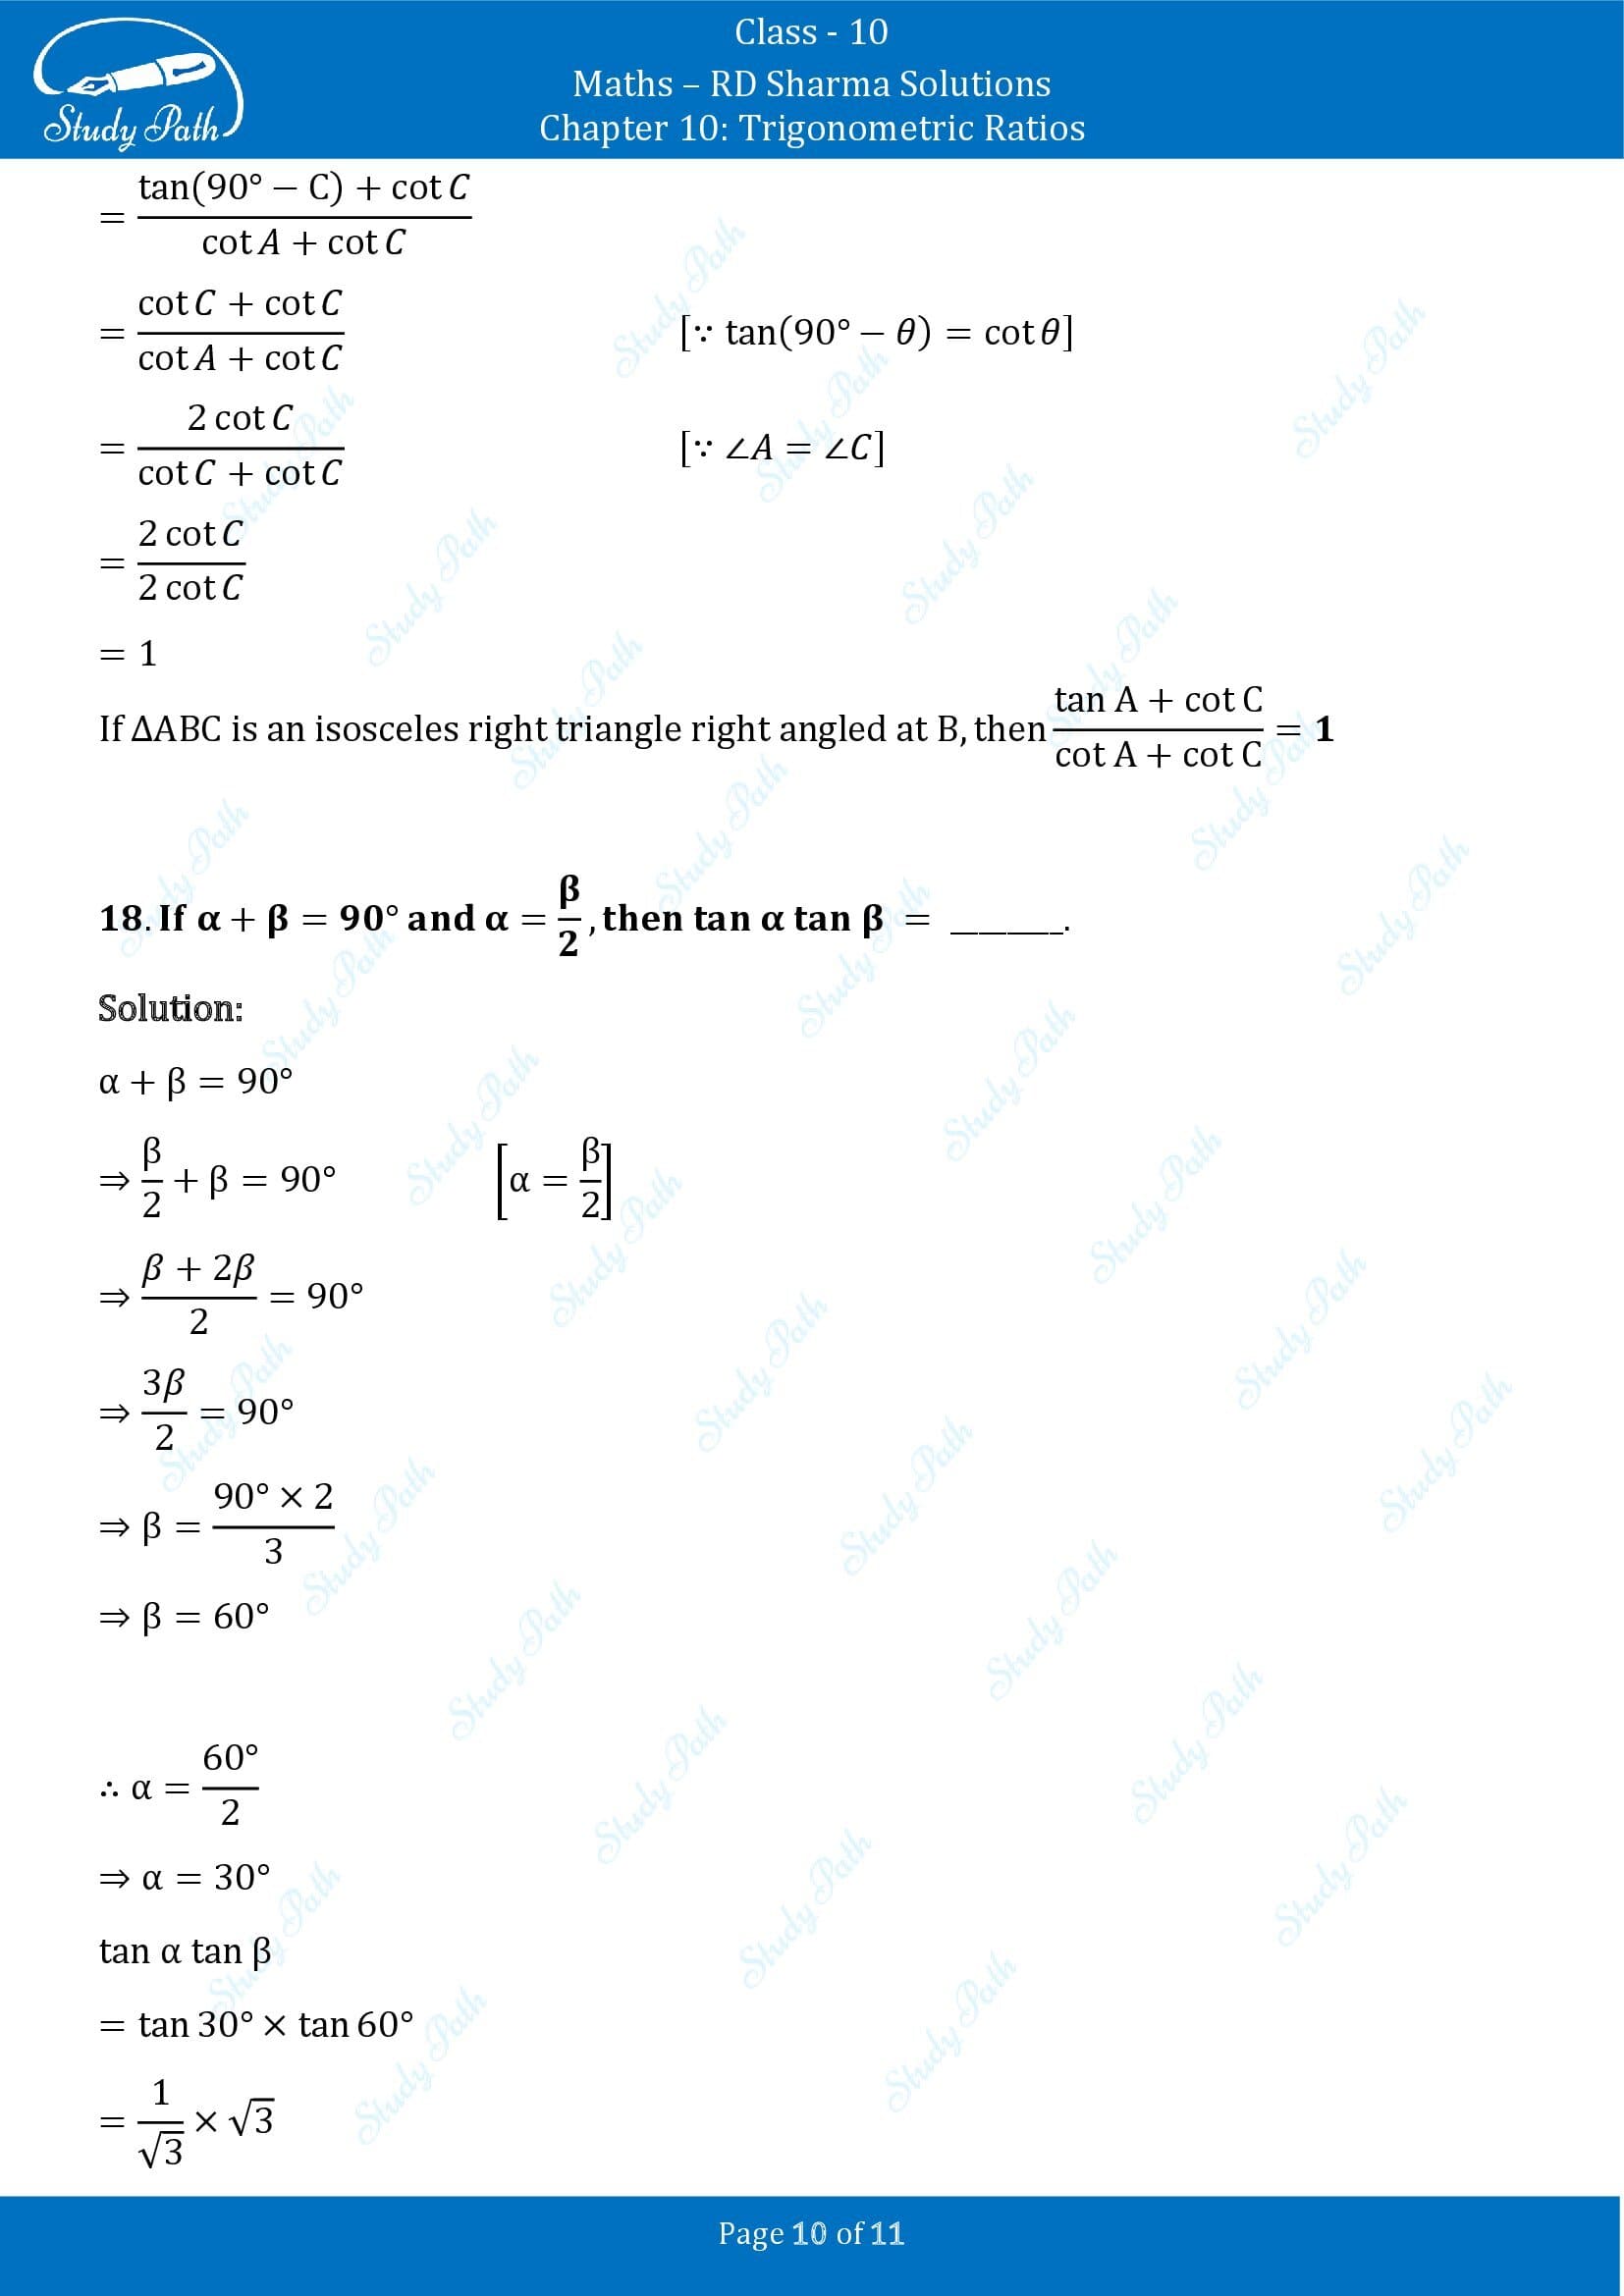 RD Sharma Solutions Class 10 Chapter 10 Trigonometric Ratios Fill in the Blank Type Questions FBQs 00010